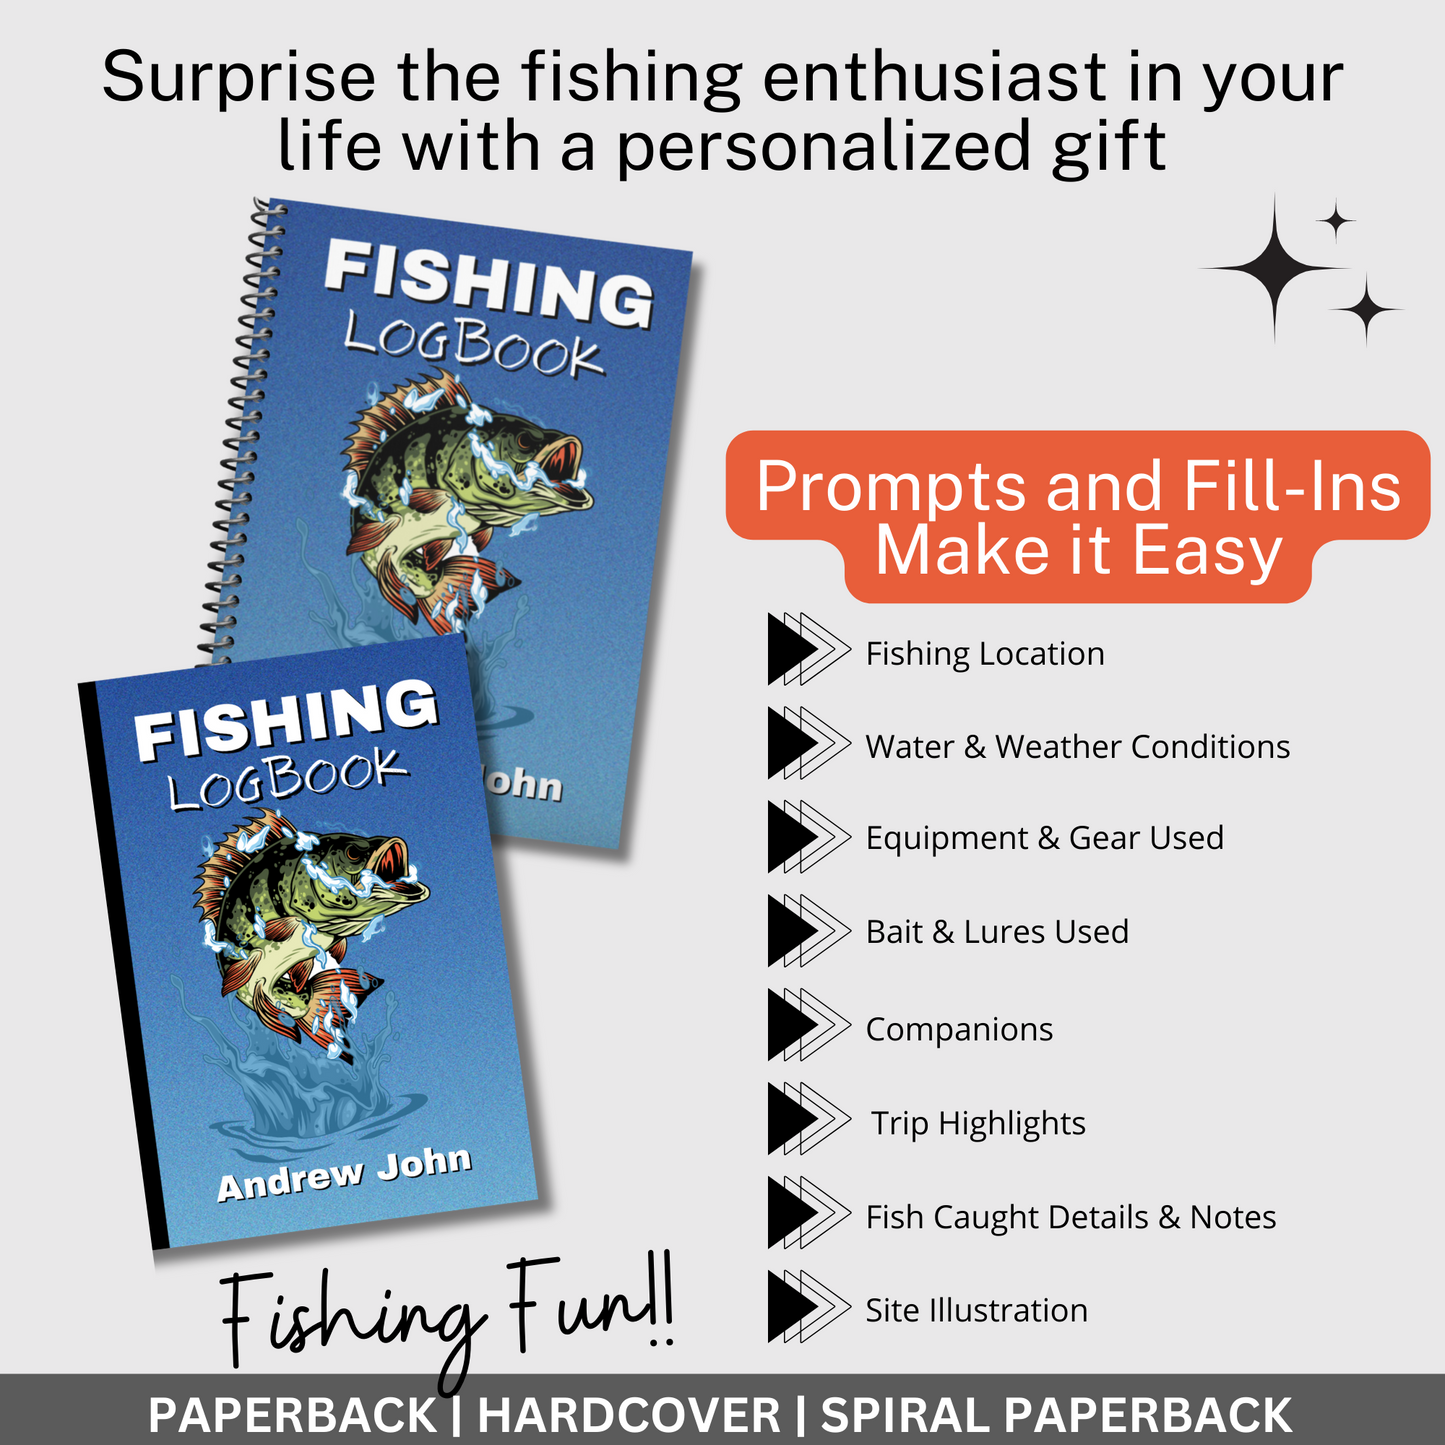 My First Fishing Logbook: 8.5 x 11 Book For Young Fishers Ages 3-5 Years,  Kids Fishing Book, Child Fishing Book, Fishing for Kids Log Journal